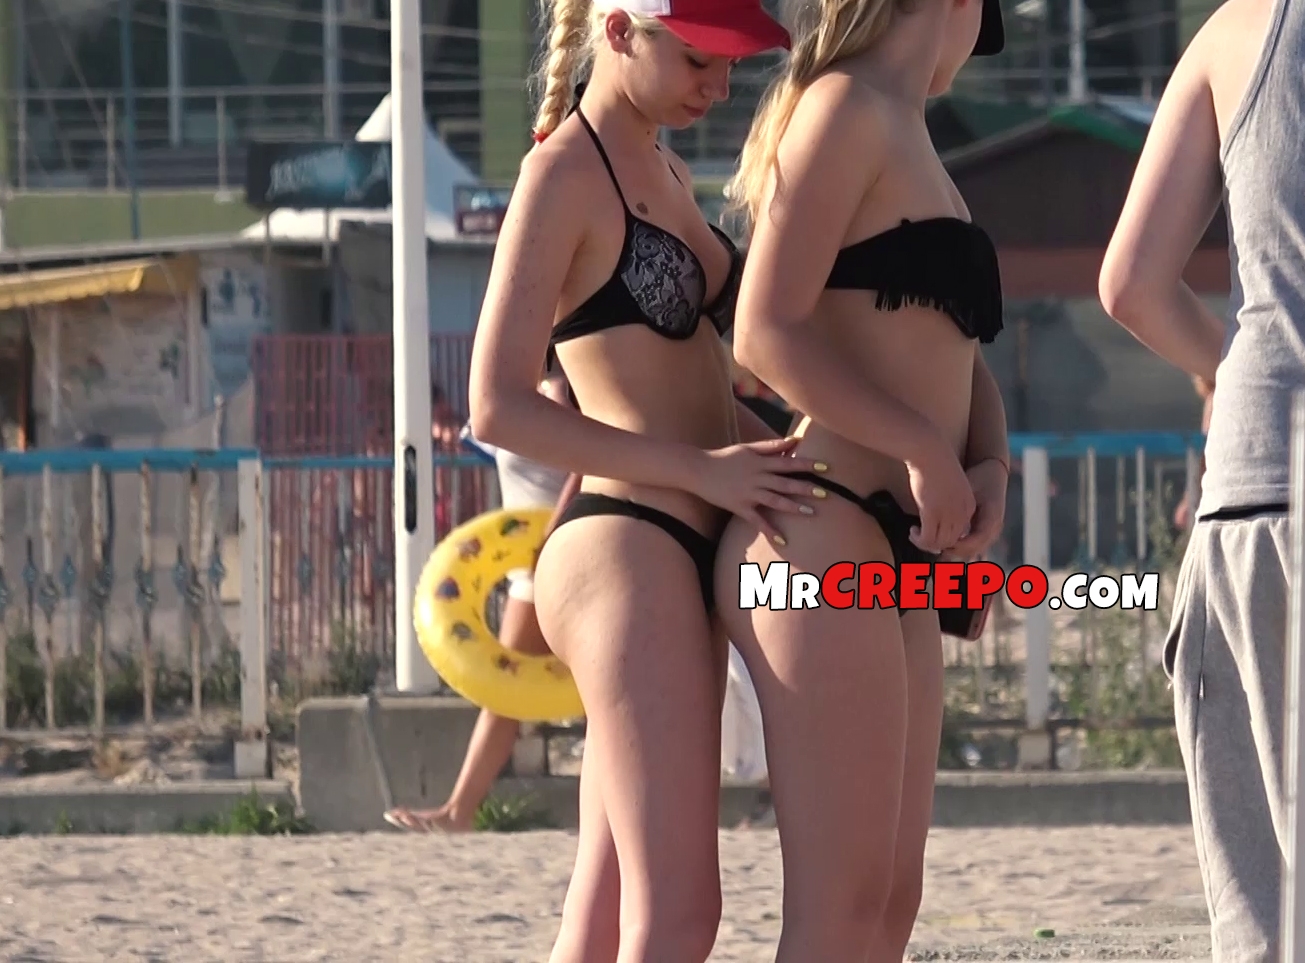 Spying on lesbian teens touching at the beach ~ Mr Adult Pic Hq